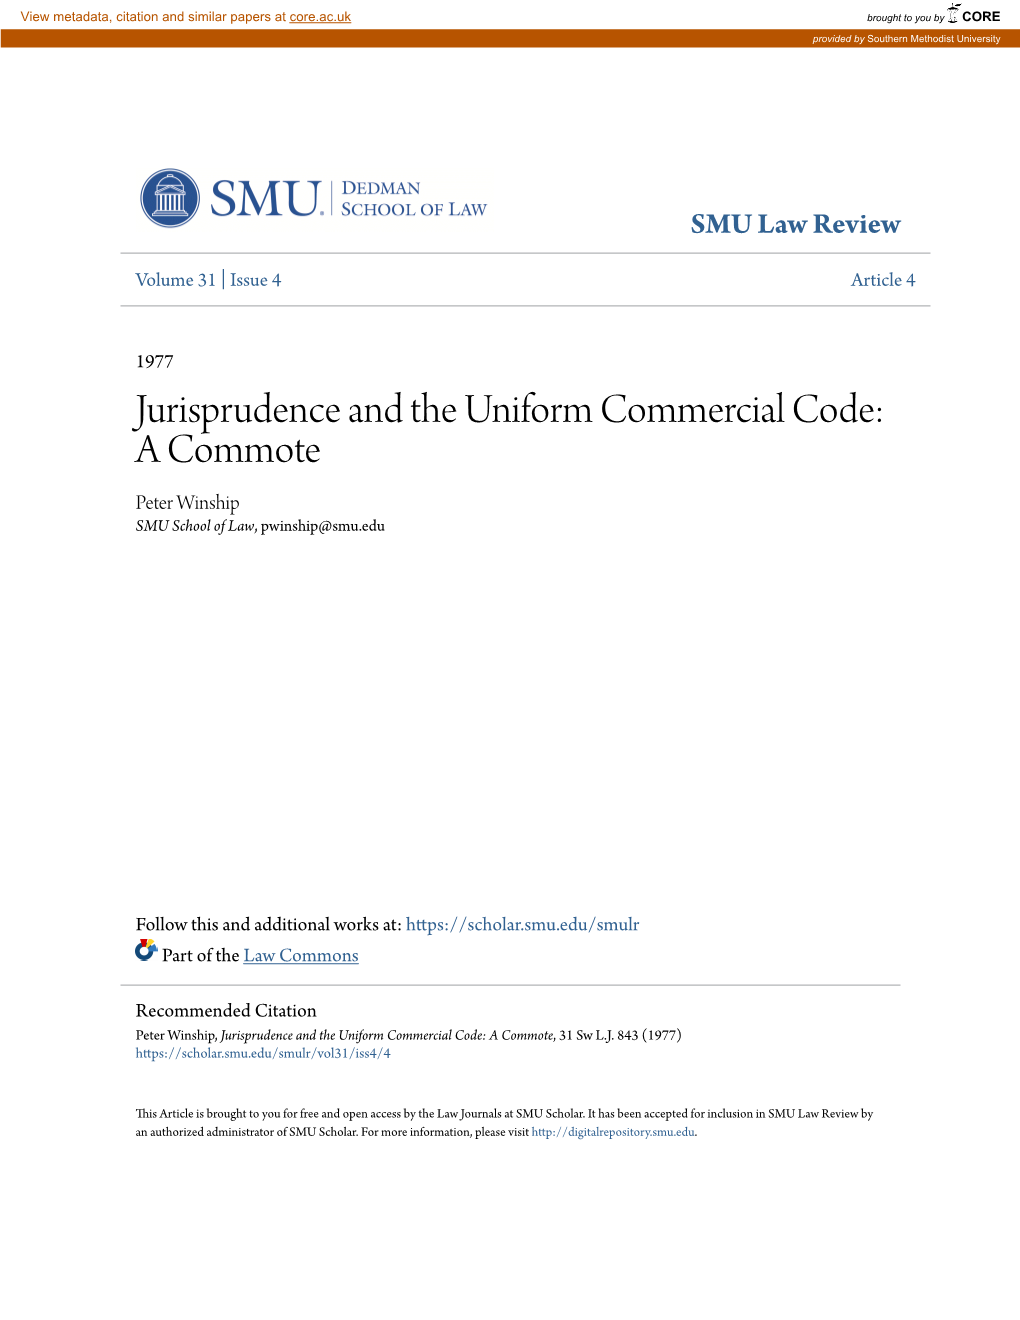 Jurisprudence and the Uniform Commercial Code: a Commote Peter Winship SMU School of Law, Pwinship@Smu.Edu